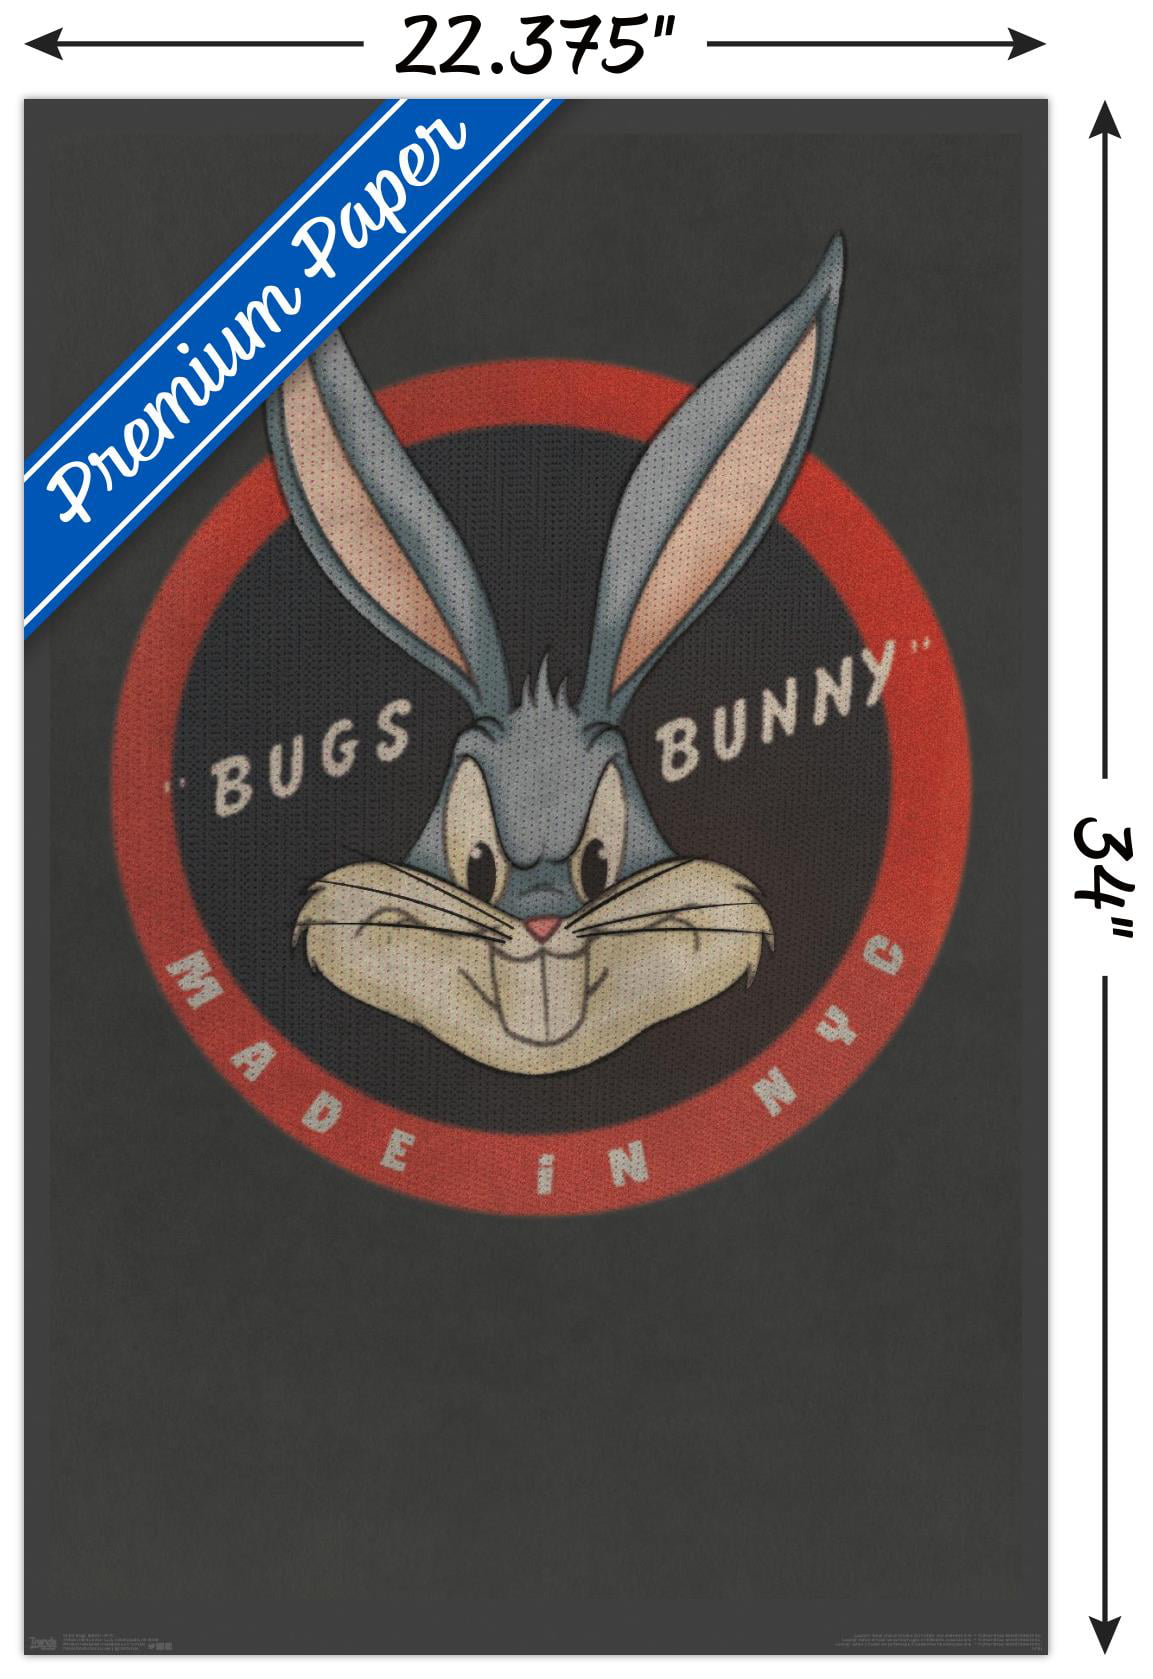 Looney Tunes - Bugs Bunny - NYC Wall Poster, 22.375